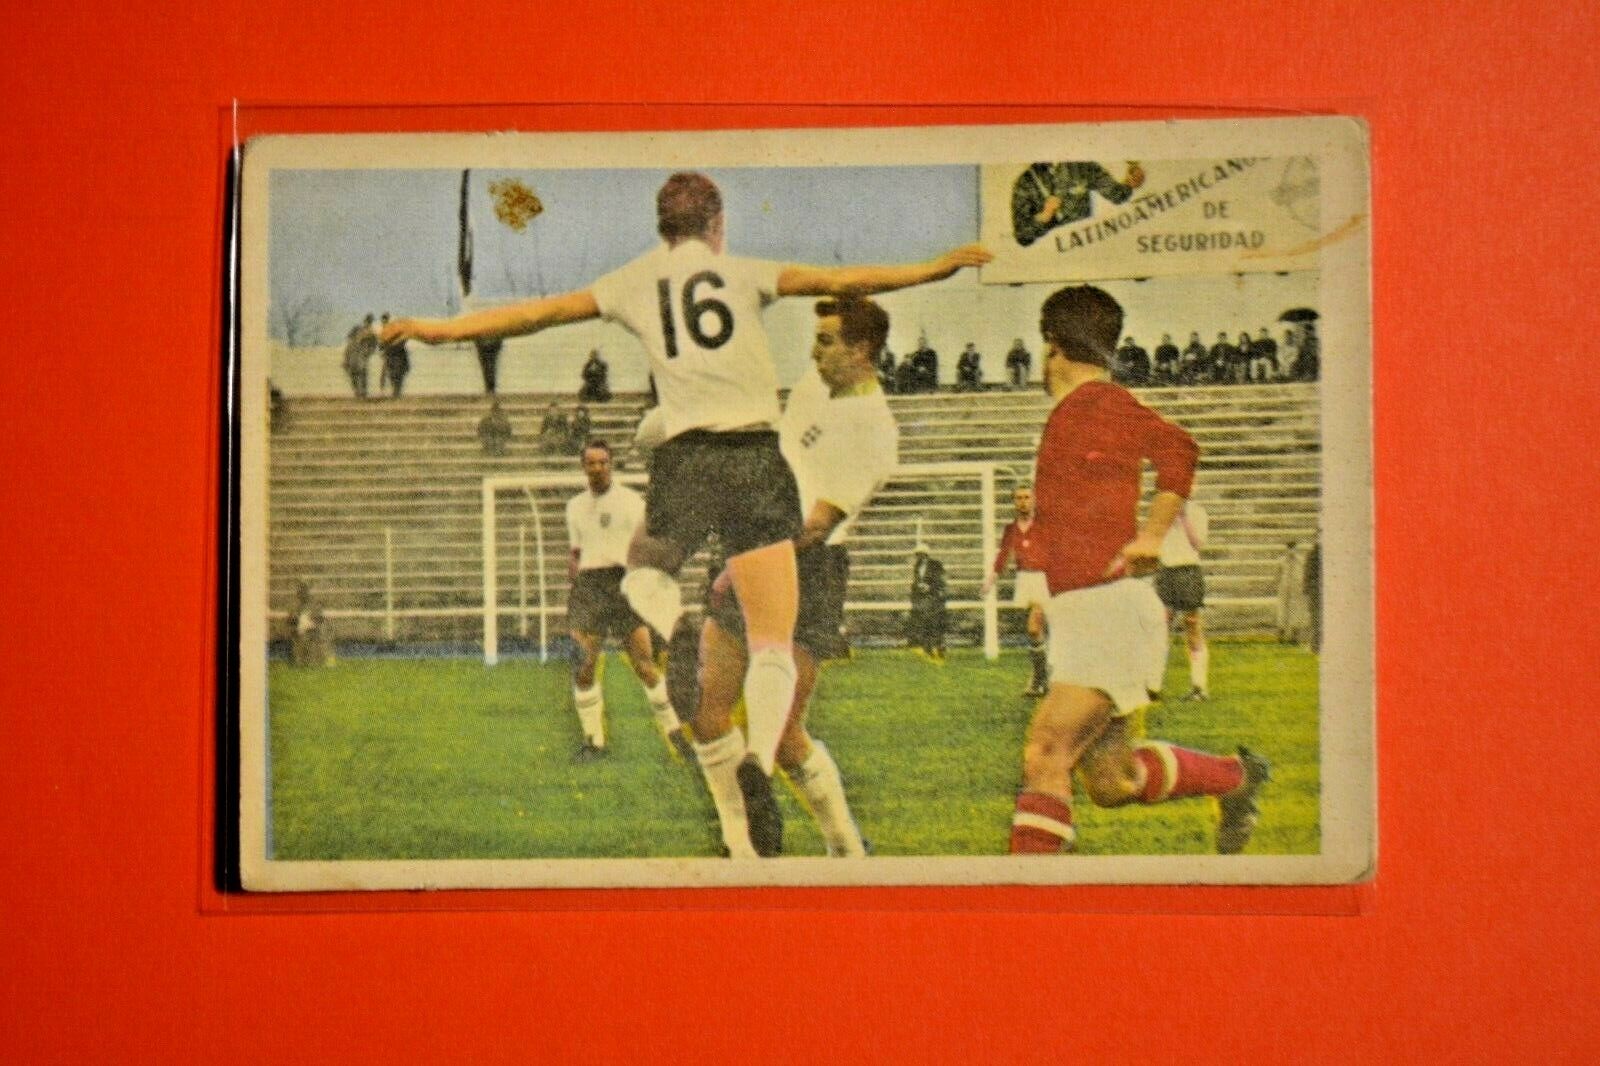 1962 WS Football World Cup Chile/Hungary-England 2:1 Rookie Bobby Moore